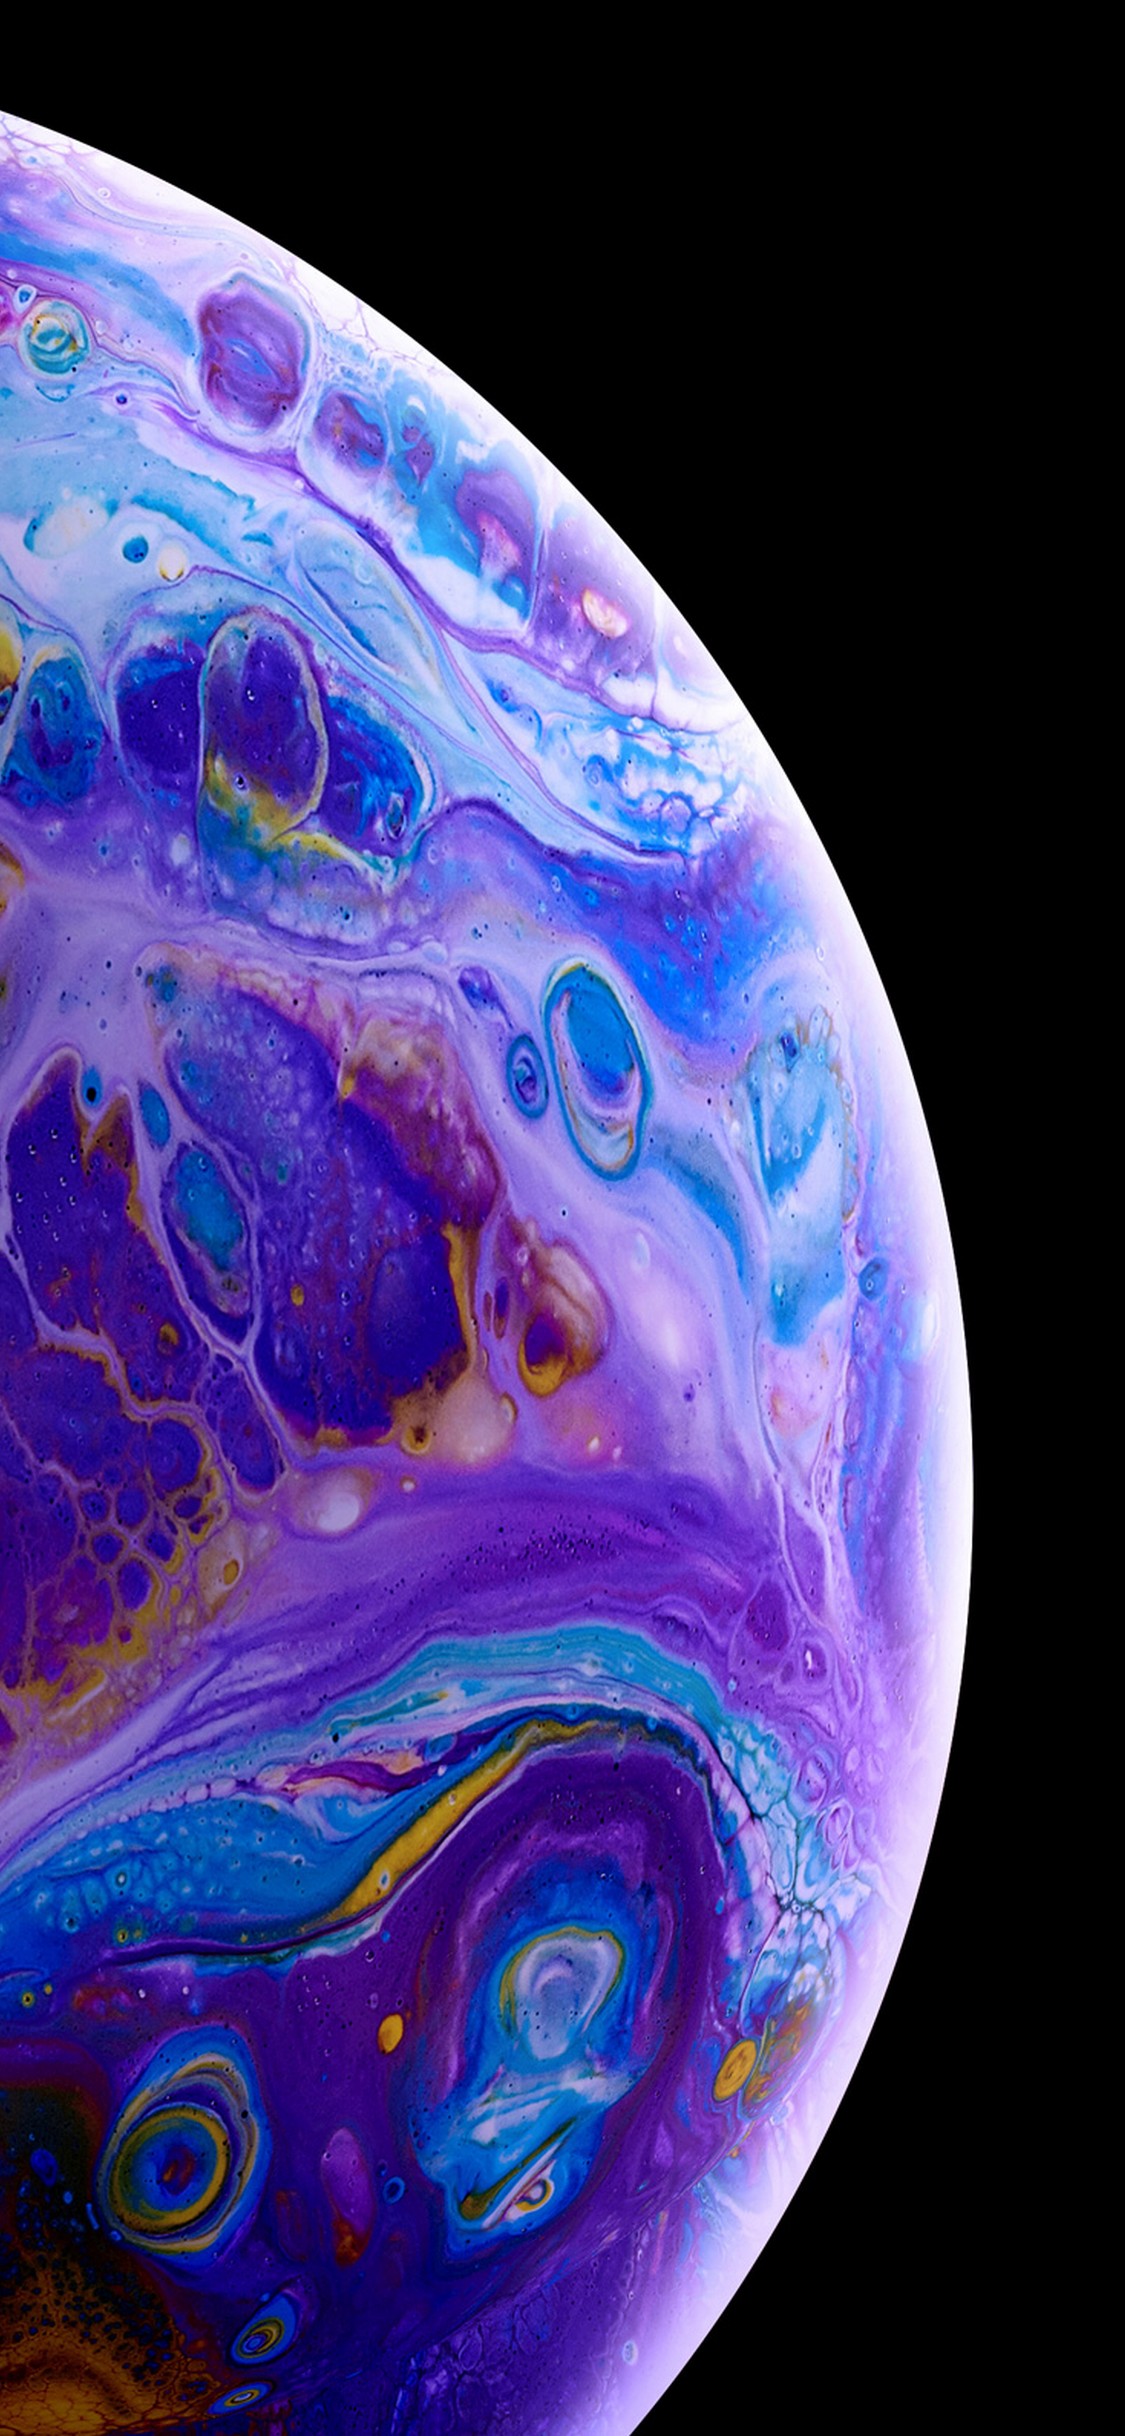 Iphone Xs Screen Wallpaper With High-resolution Pixel - Iphone X Wallpaper Planet - HD Wallpaper 